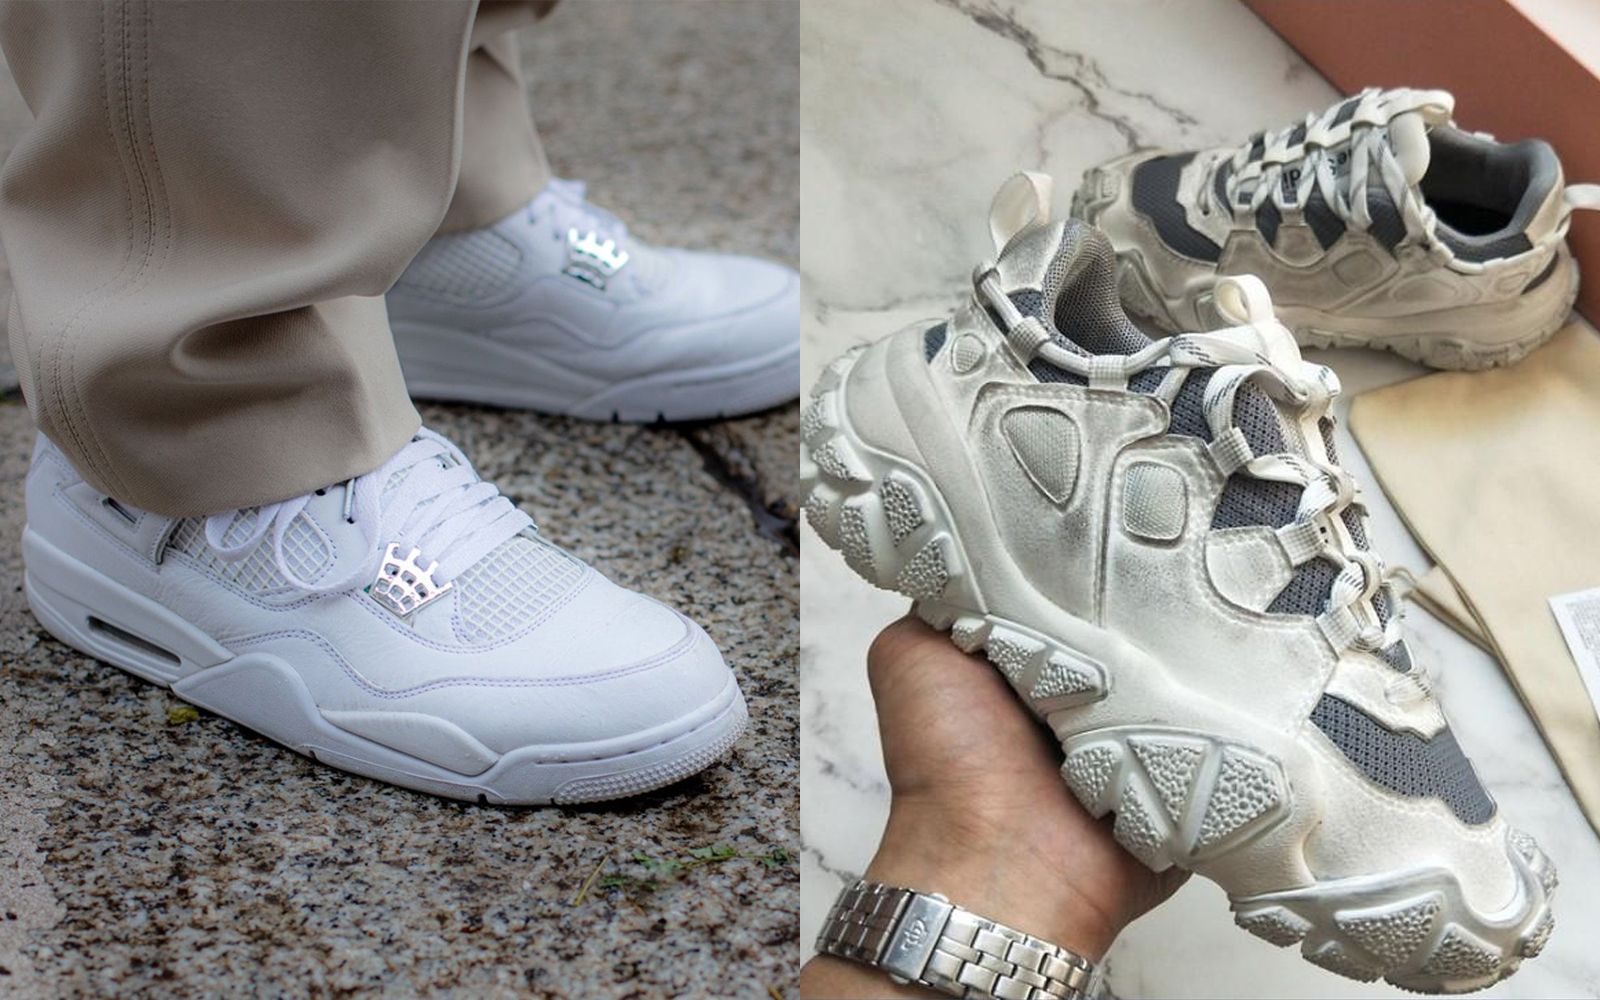 Are the dirty sneakers the new clean sneakers?